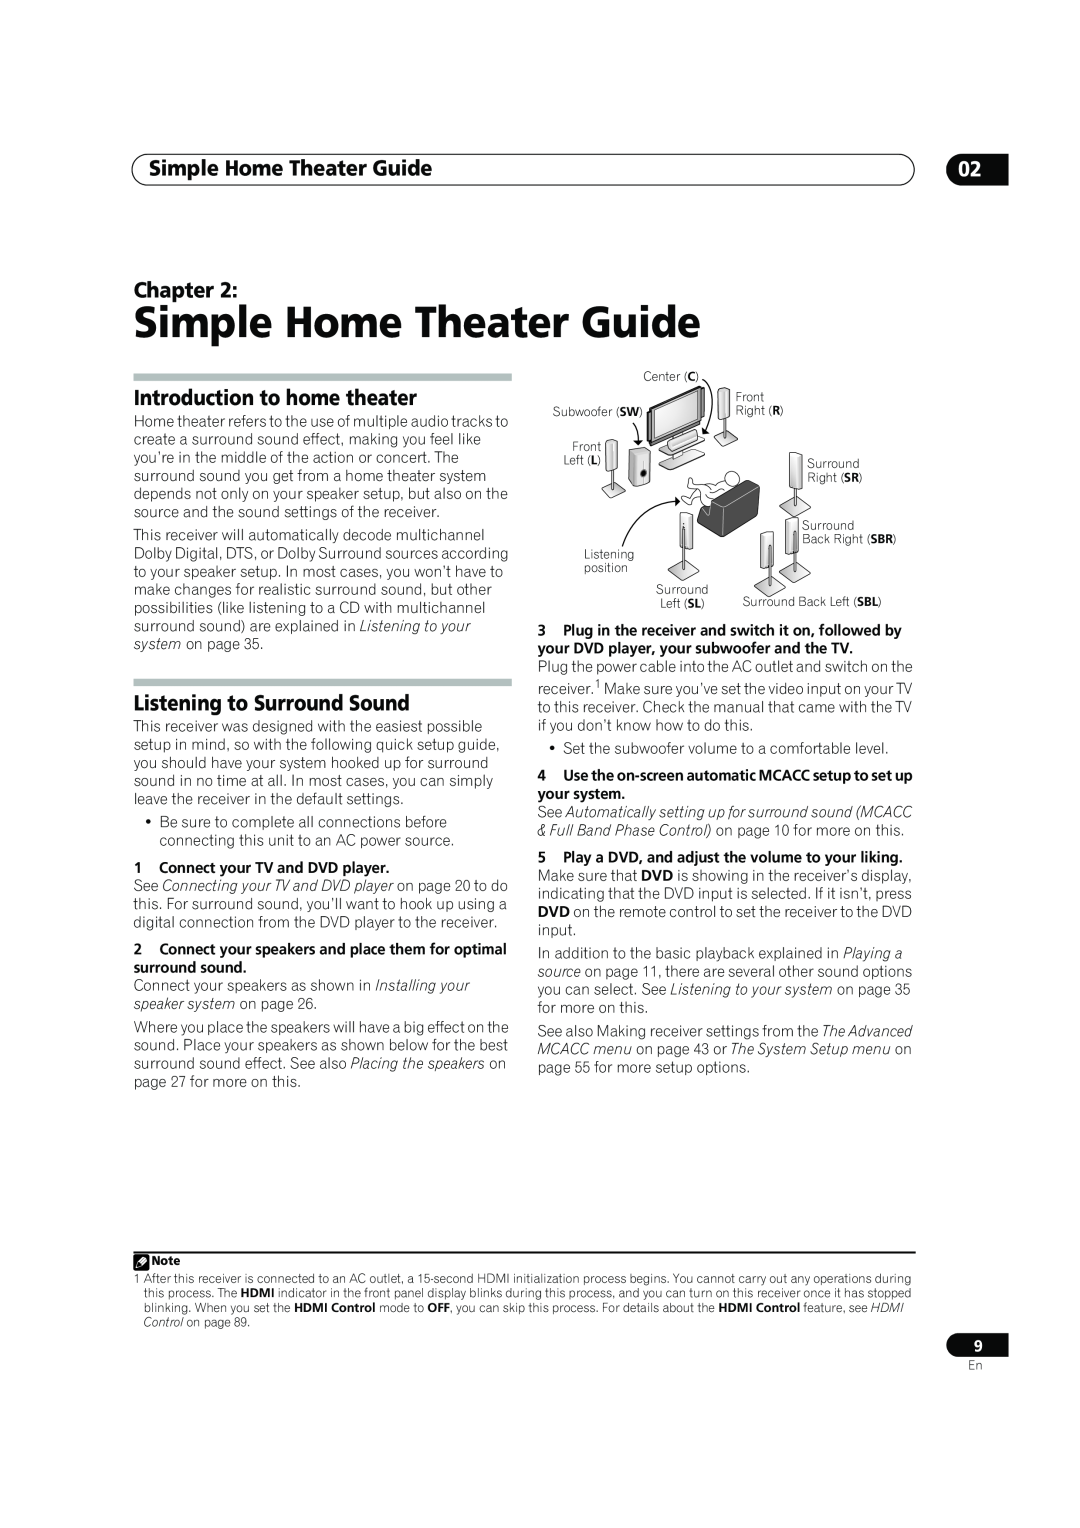 Pioneer SC-05, SC-07 manual Simple Home Theater Guide, Chapter, Introduction to home theater, Listening to Surround Sound 